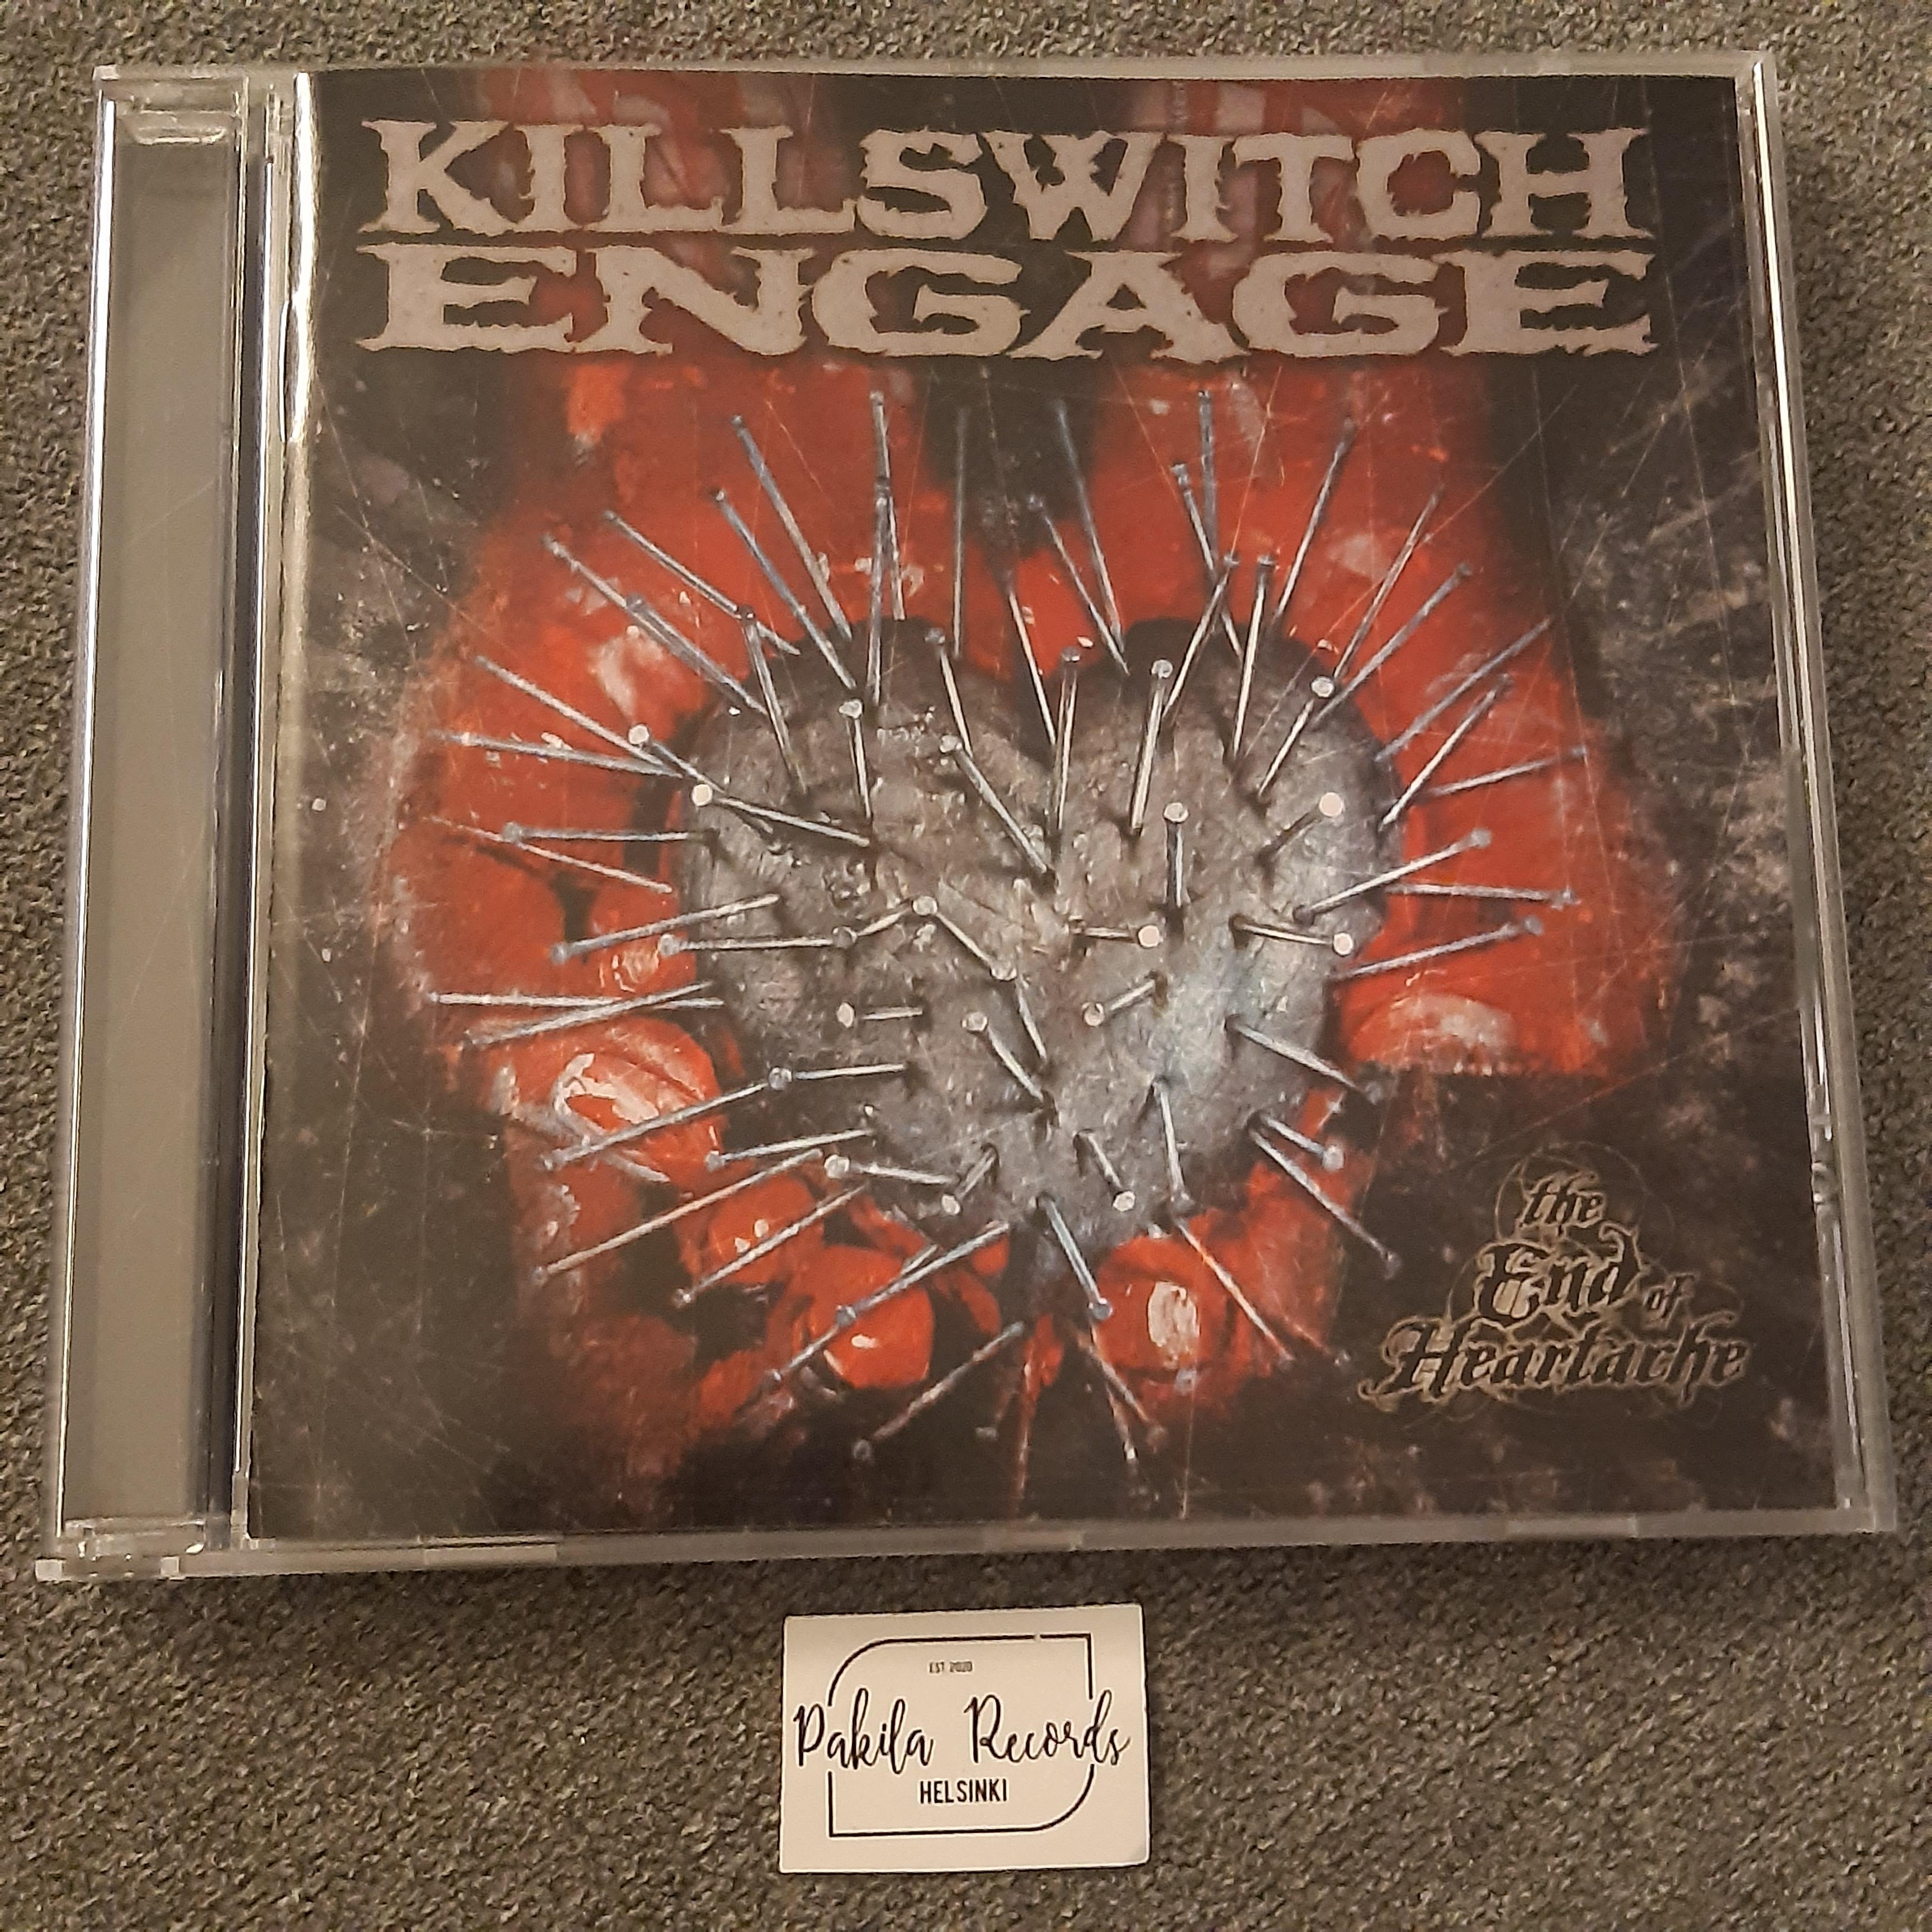 Killswitch Engage - The End Of Heartache - CD (käytetty)